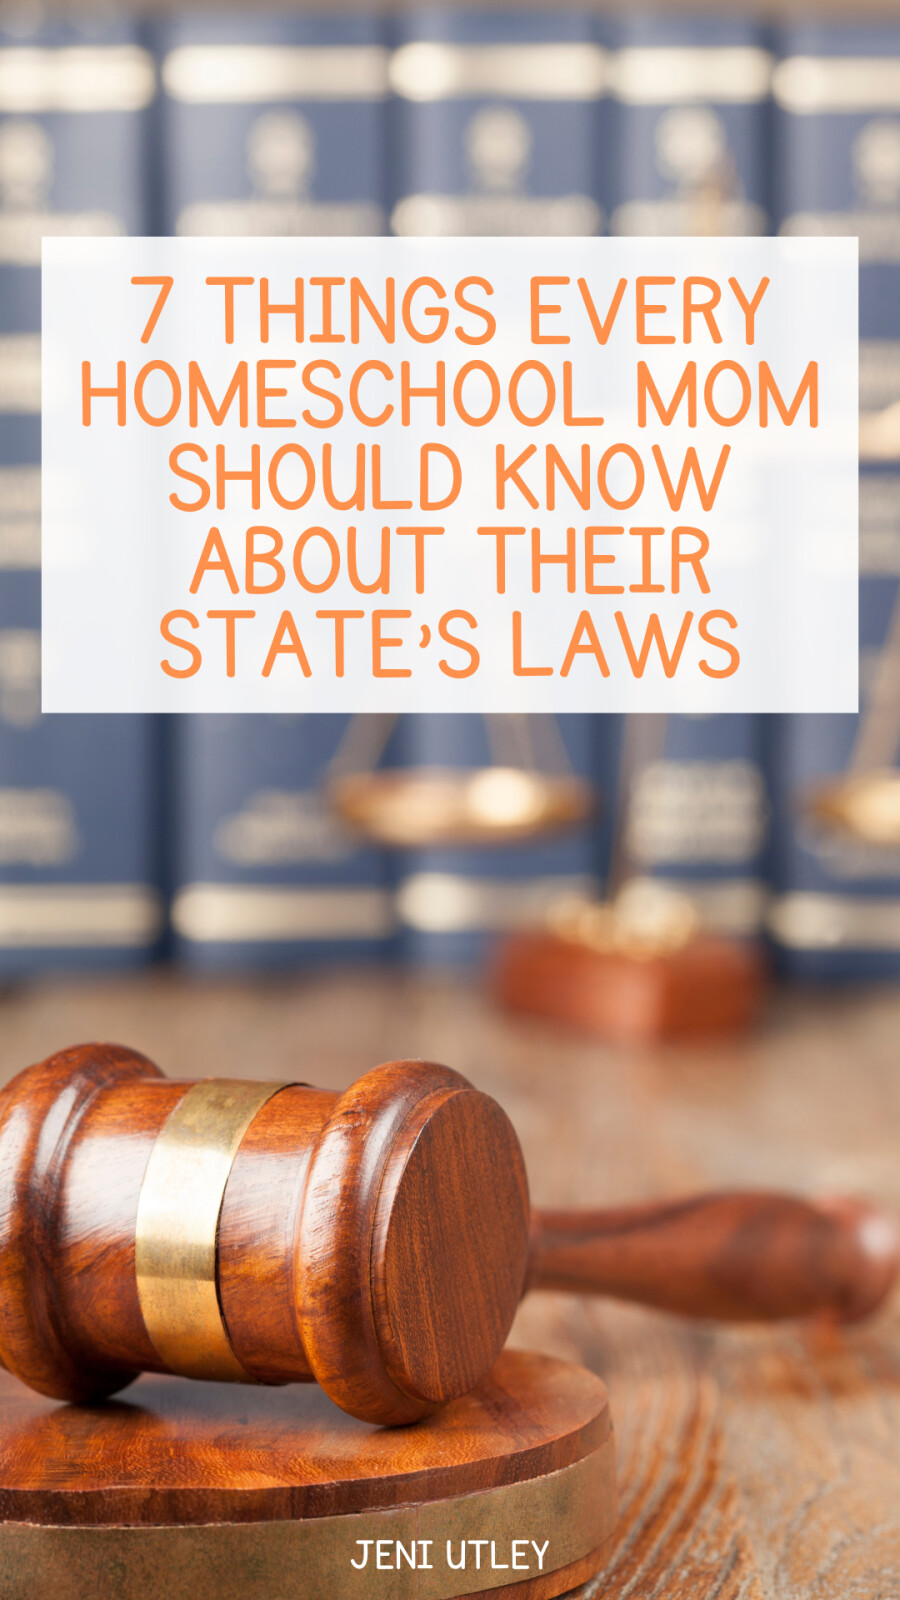 7 Things Every Homeschool Mom Should Know About Their State’s Laws